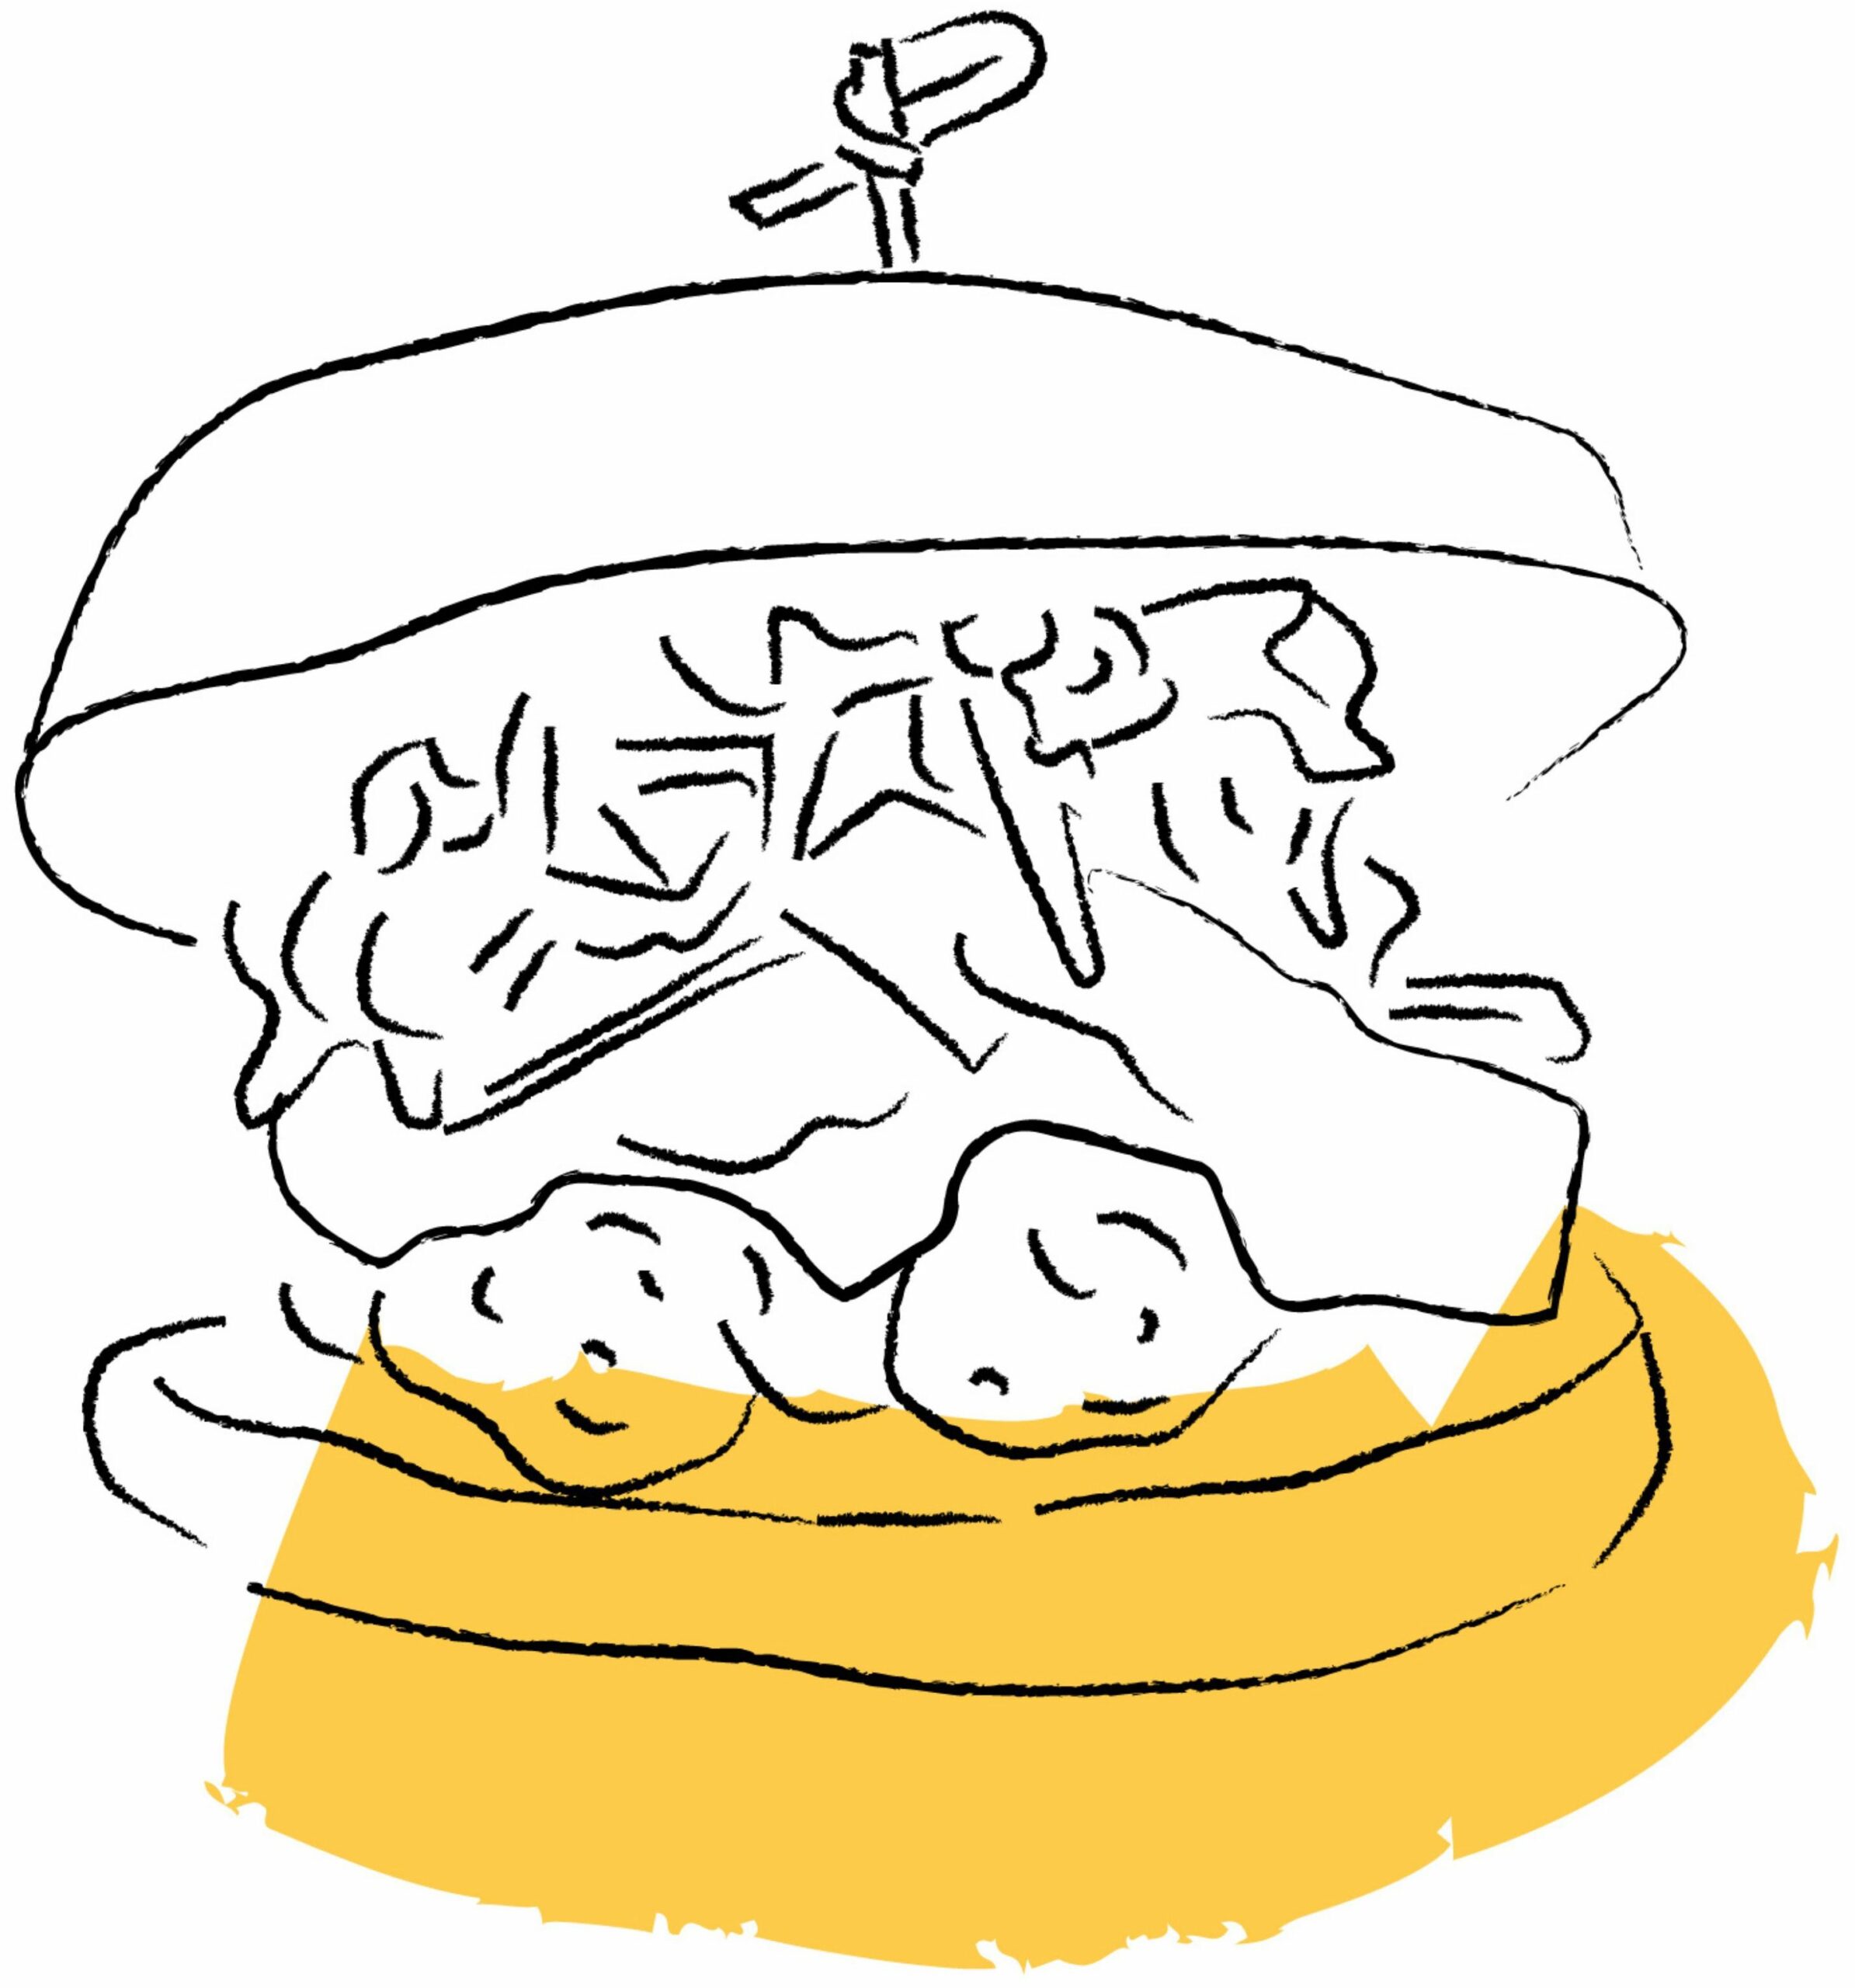 hand-drawn illustration of F&P sandwich with yellow swatch